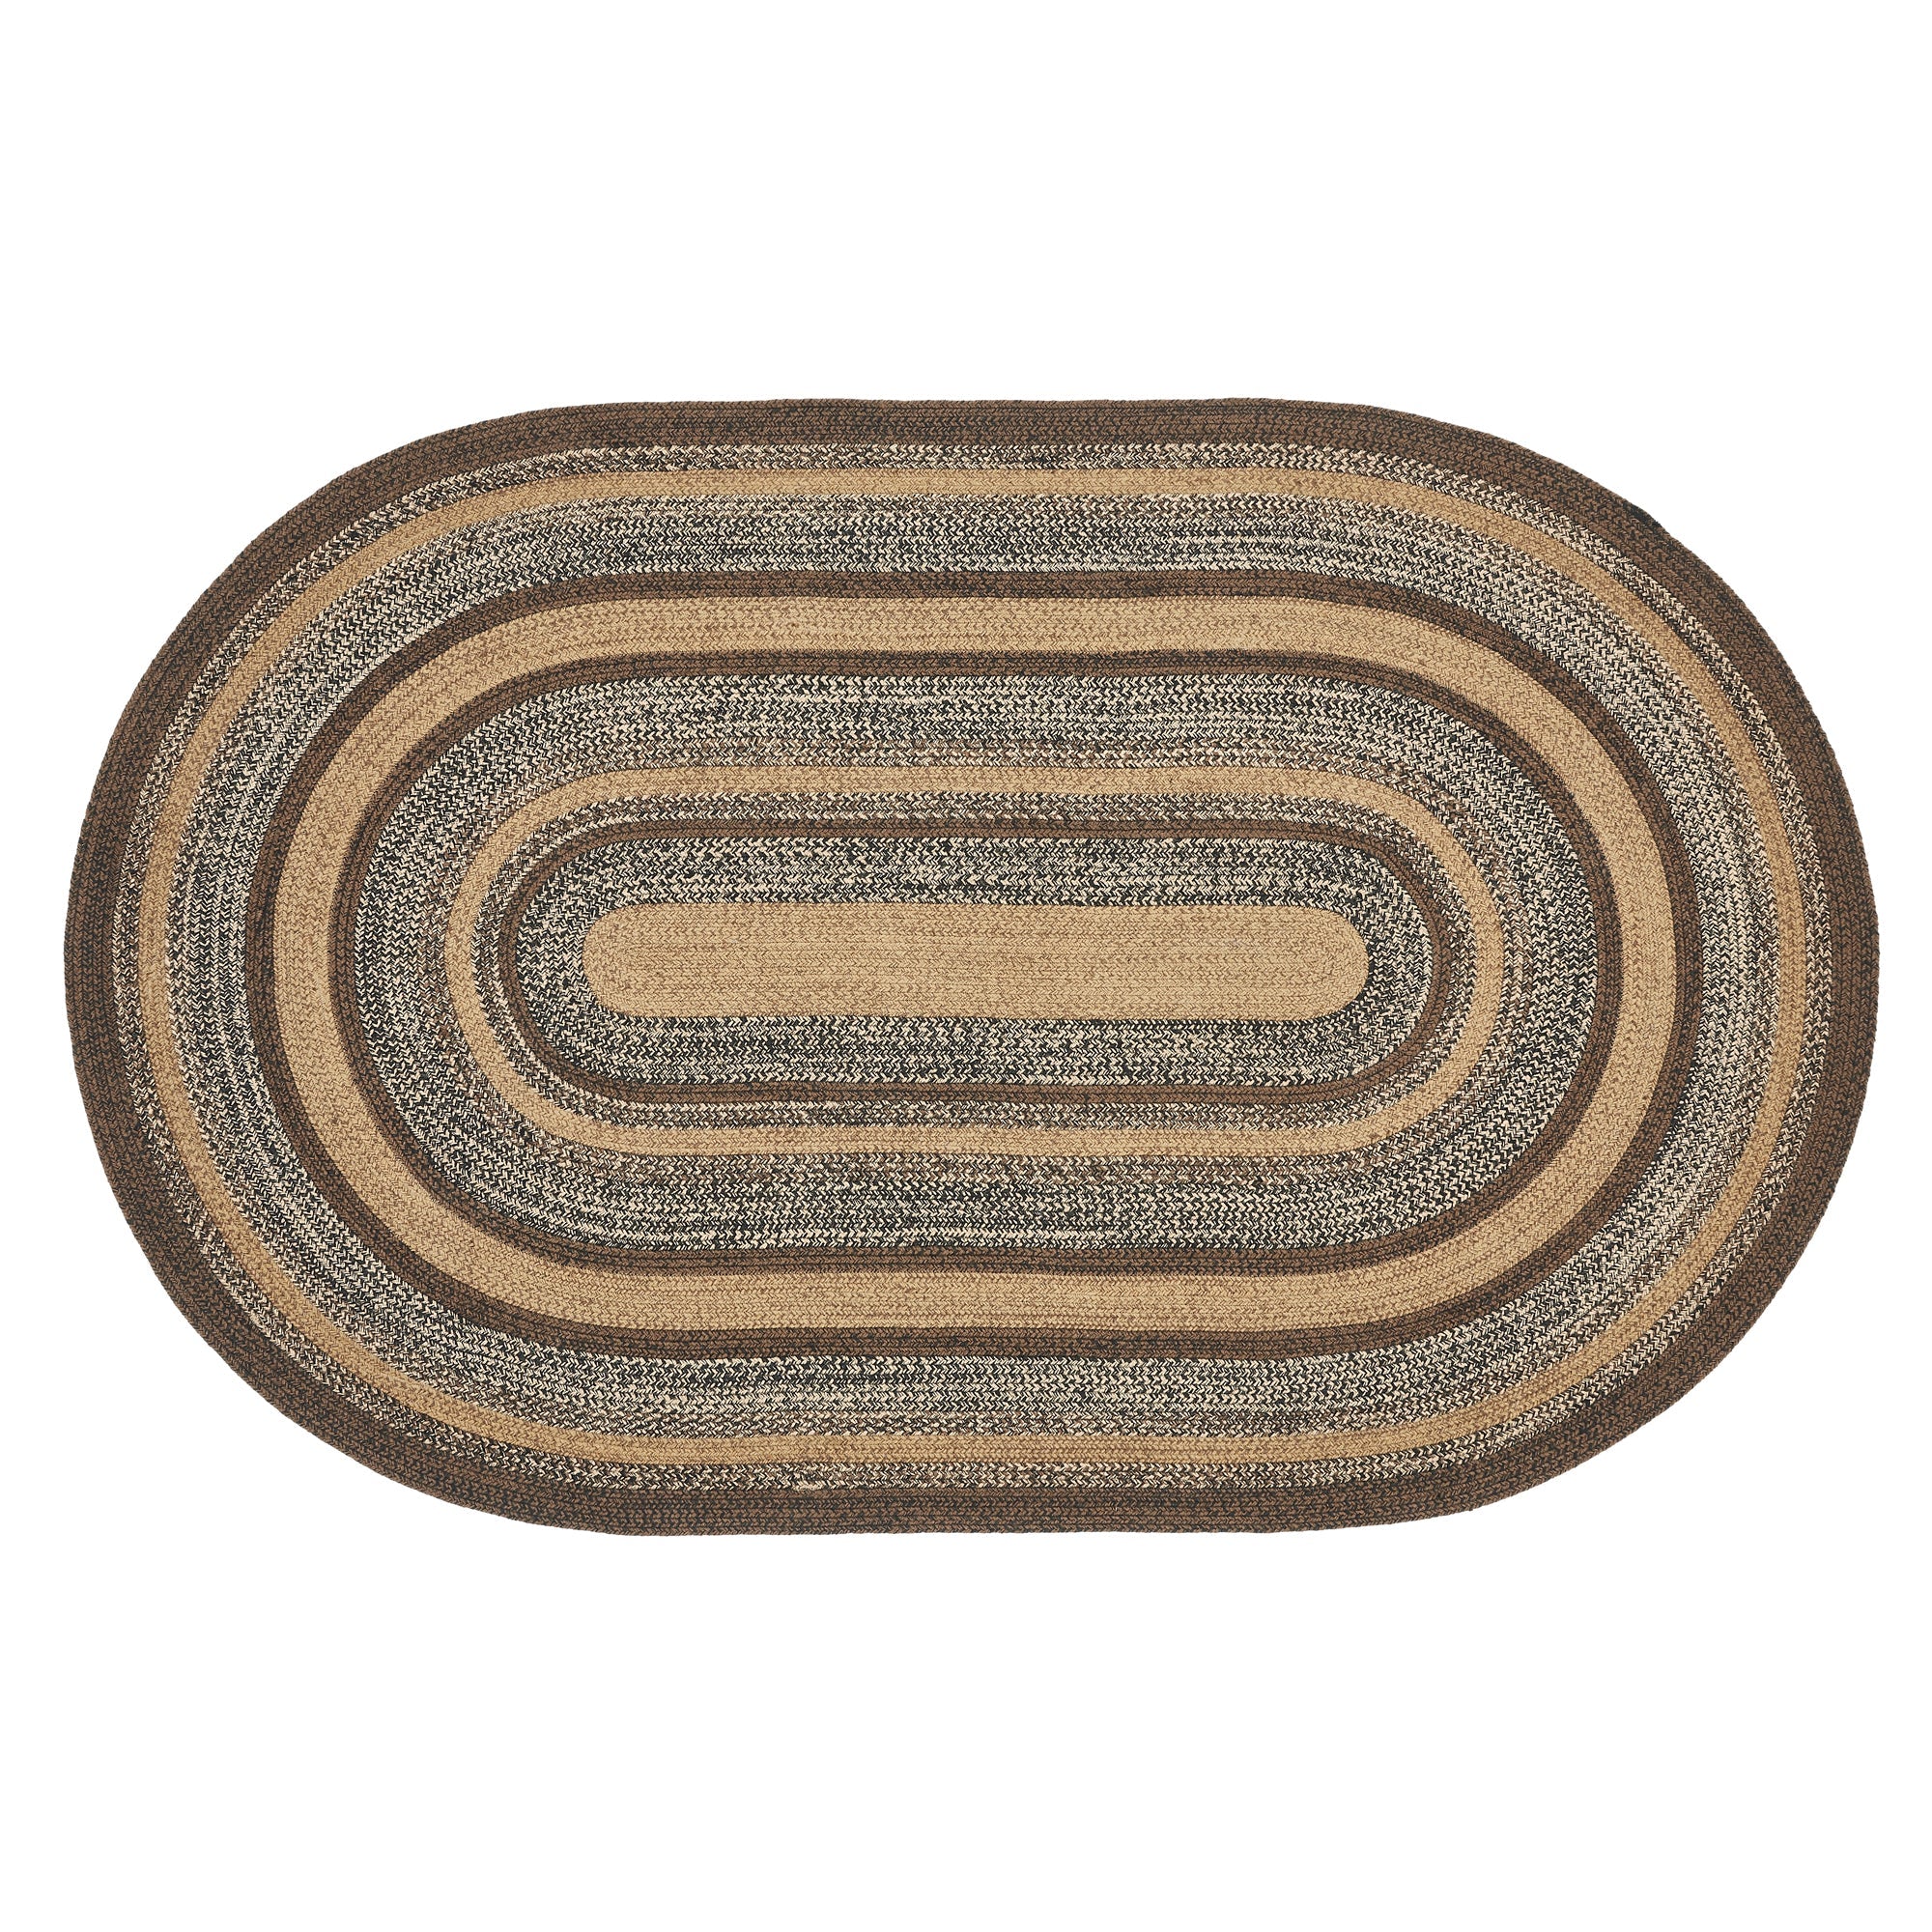 Espresso Jute Braided Rug Oval with Rug Pad 5'x8' VHC Brands